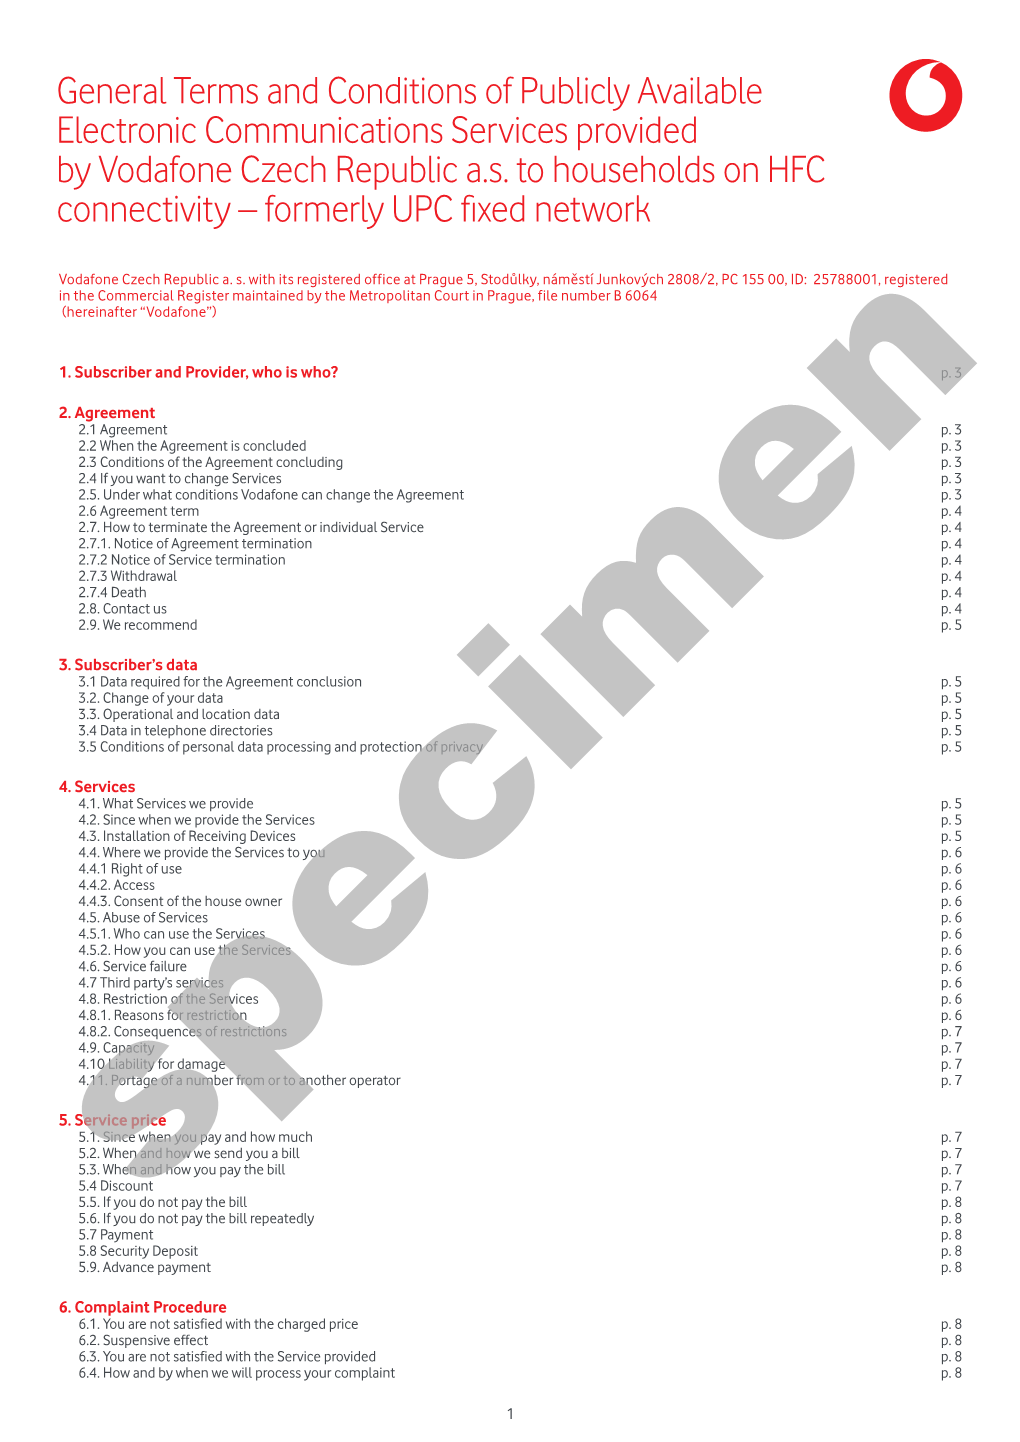 General Terms and Conditions of Publicly Available Electronic Communications Services Provided by Vodafone Czech Republic A.S